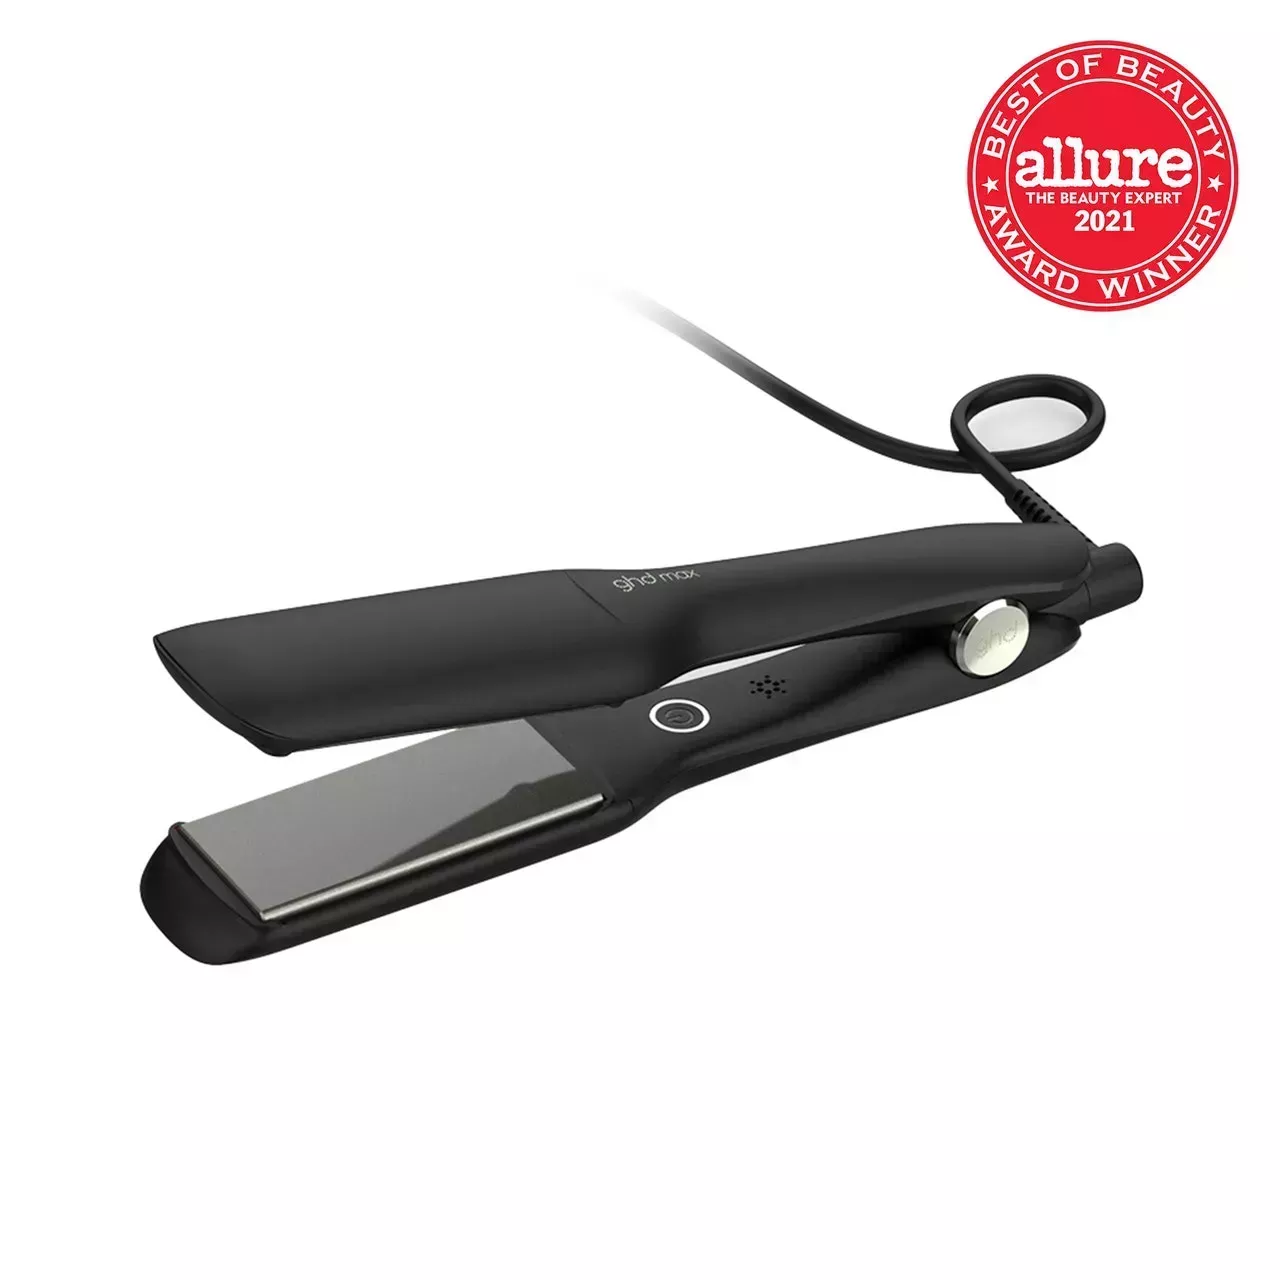 GHD Max Styler flat iron on a white background